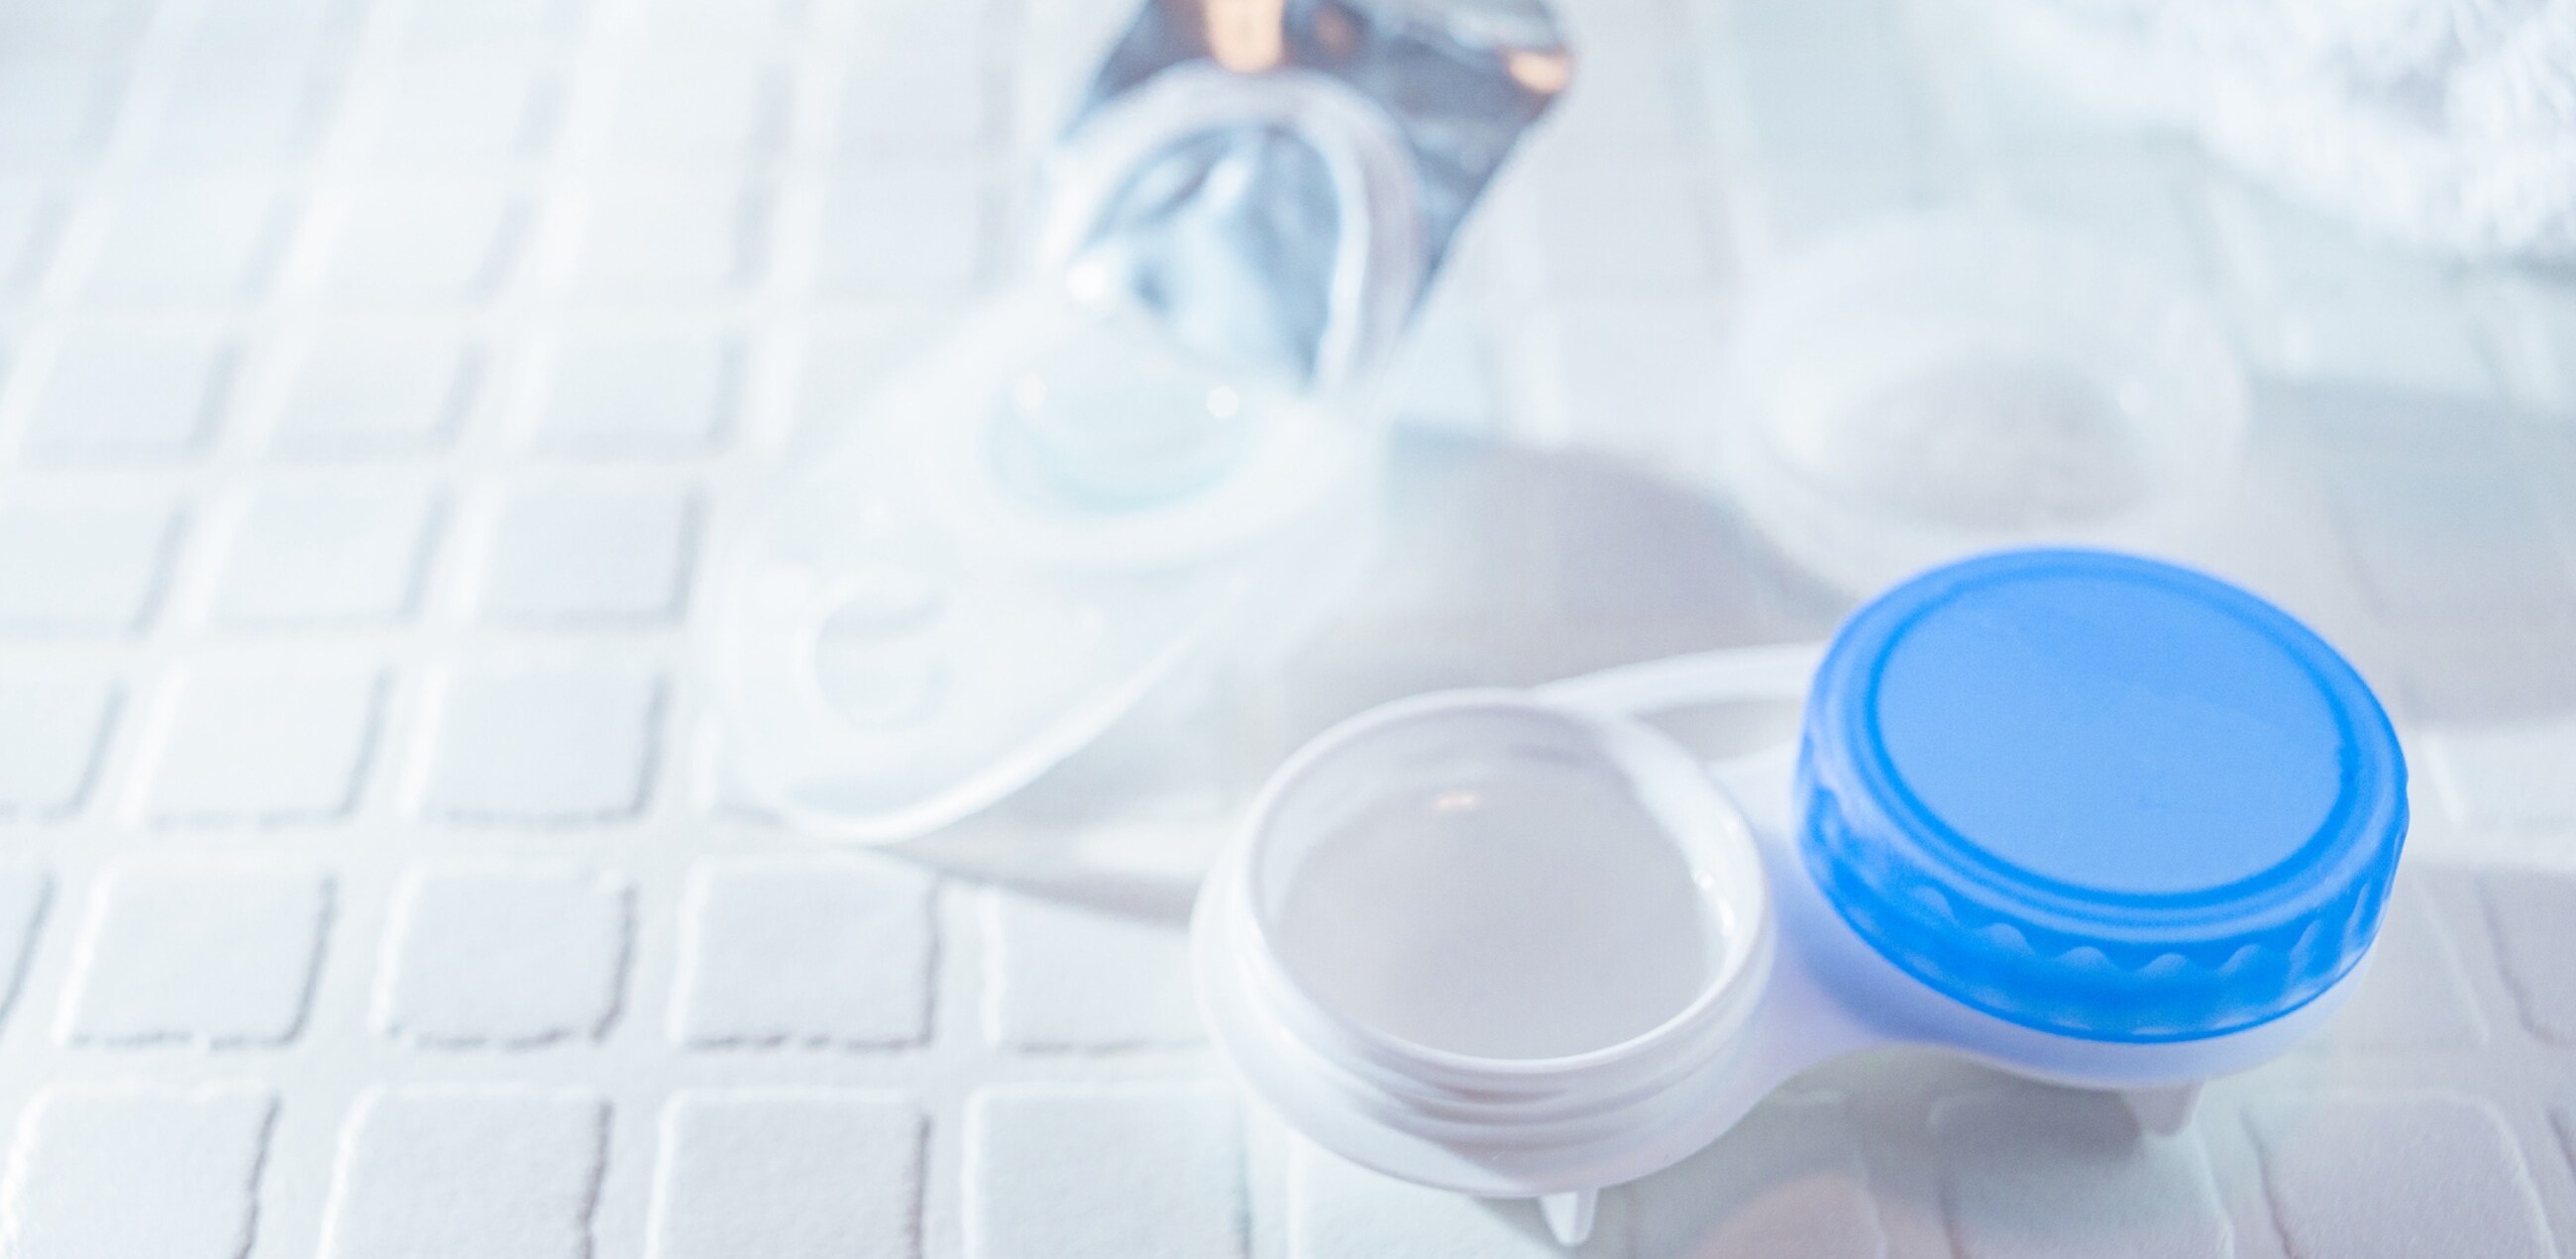  What if you accidentally used expired contact lens solution?